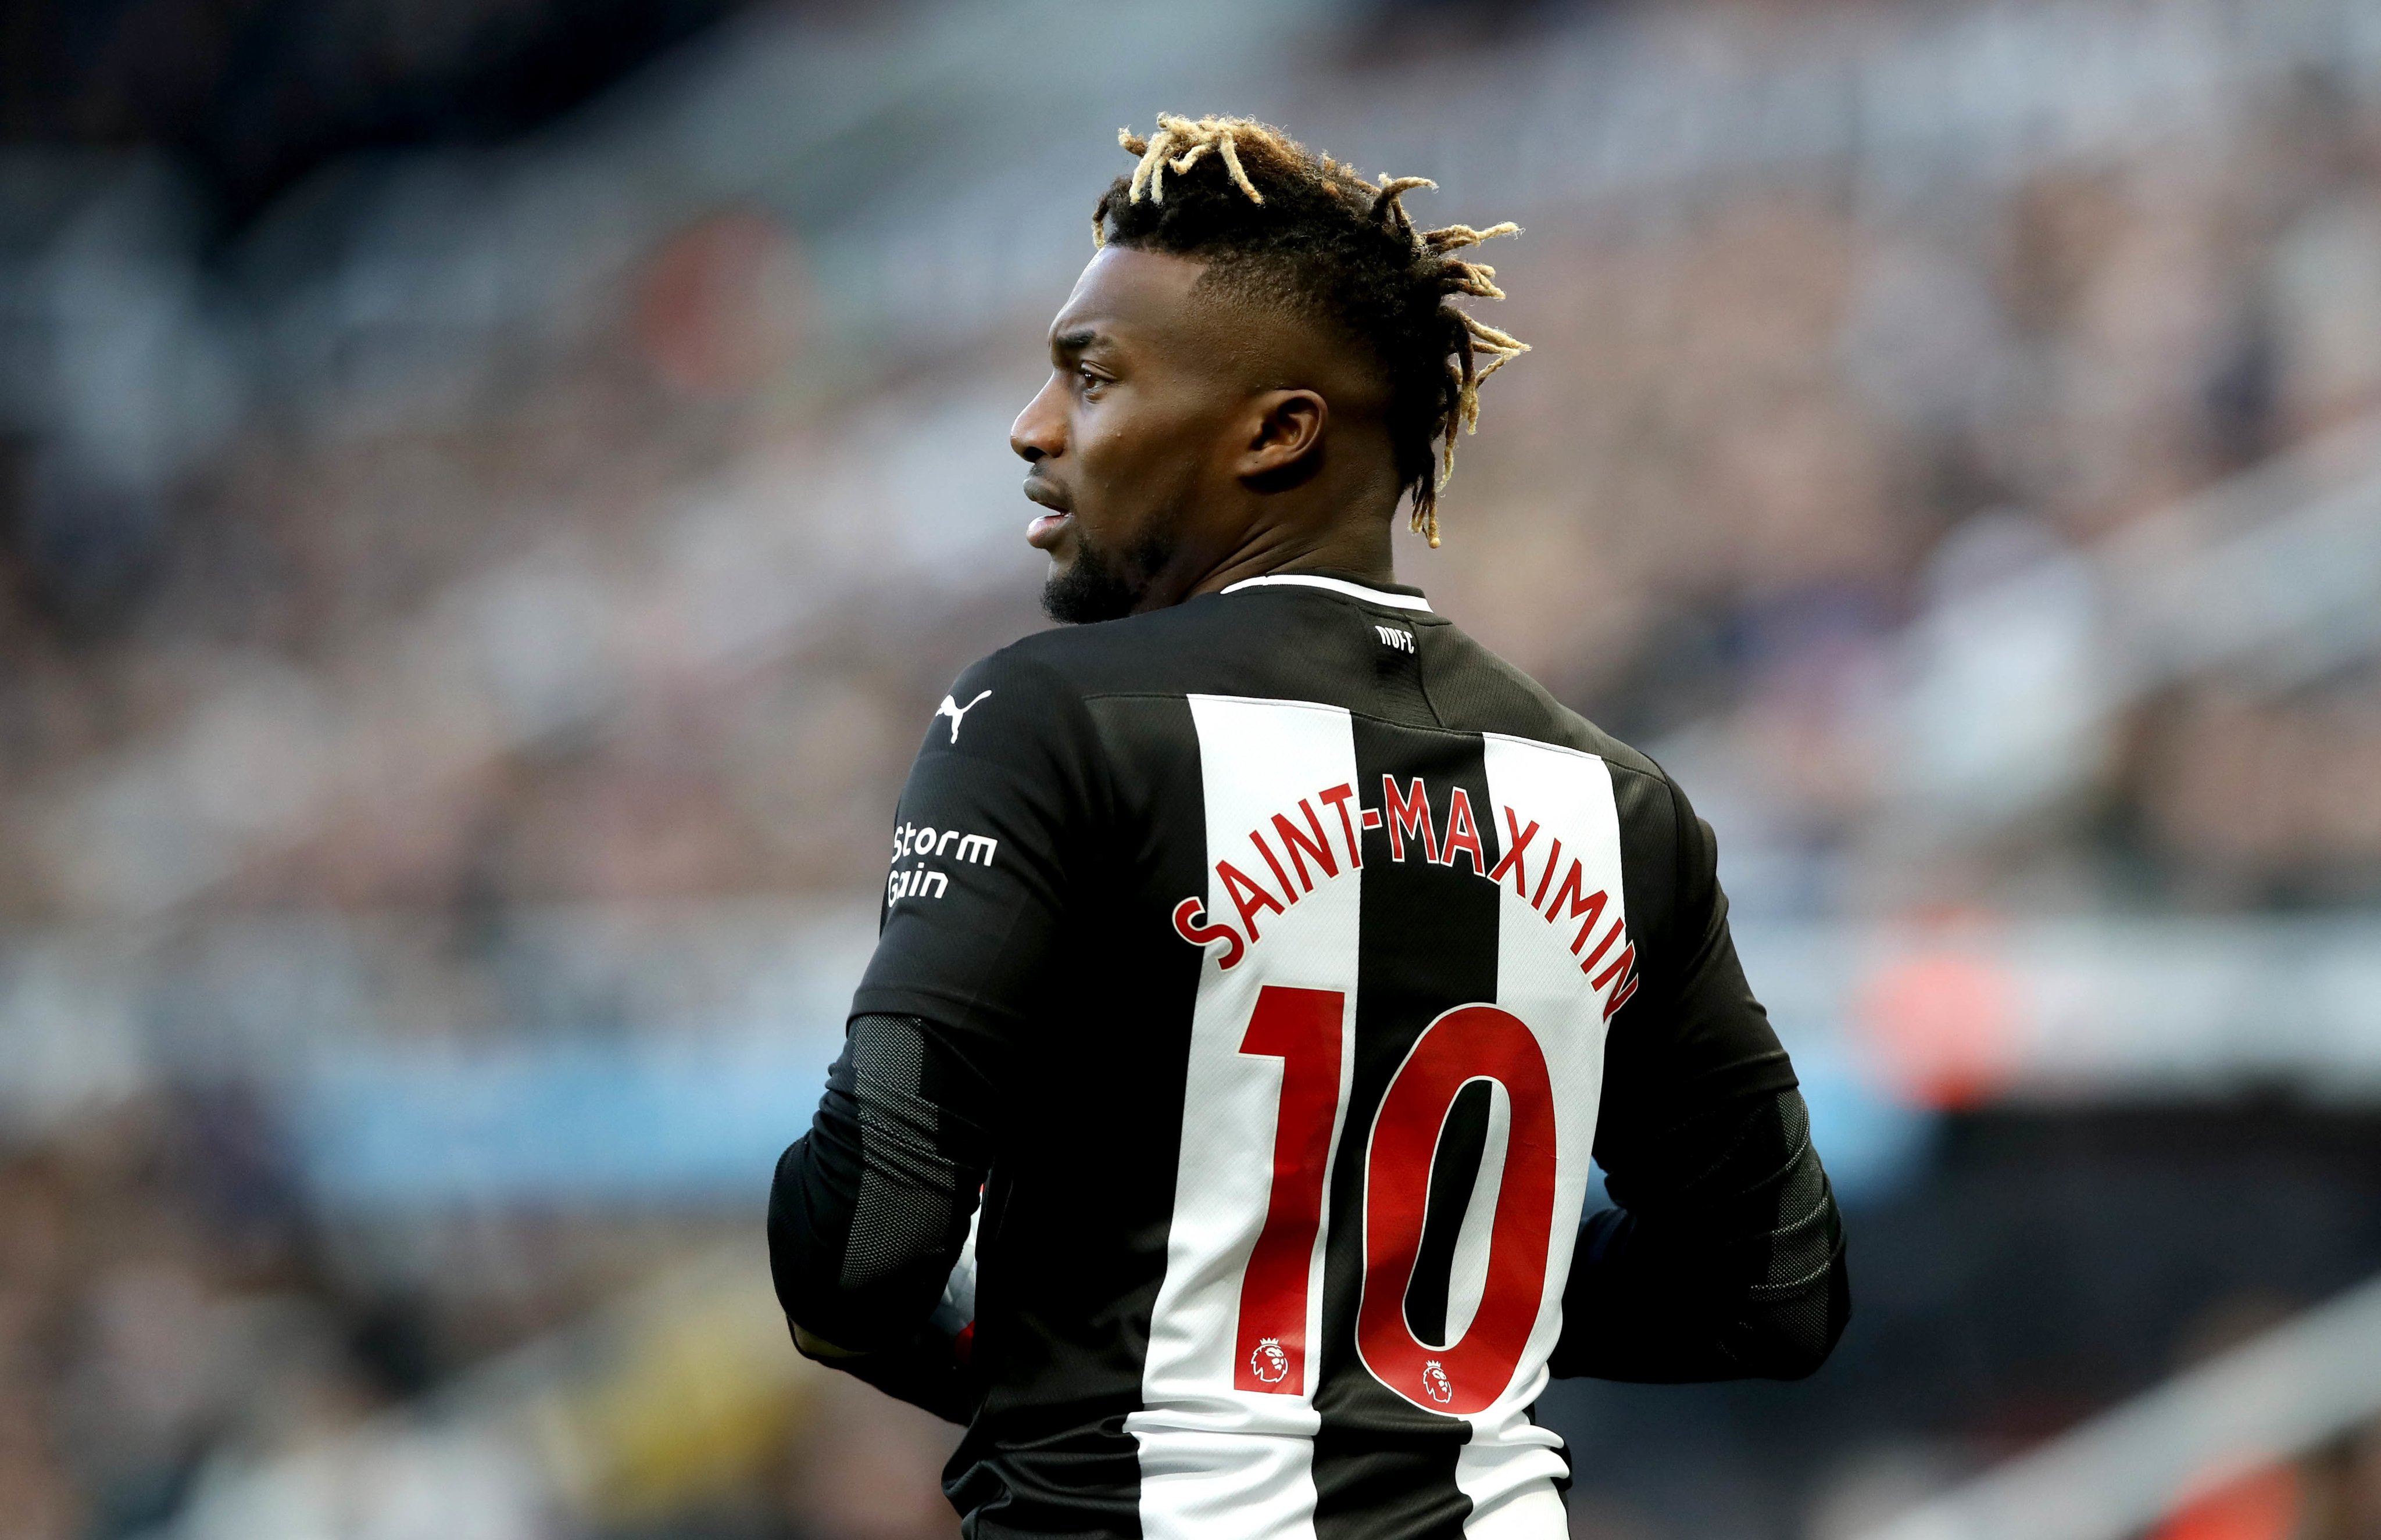 Reports | Newcastle United looking to sell Allan Saint-Maximin amidst interest from England